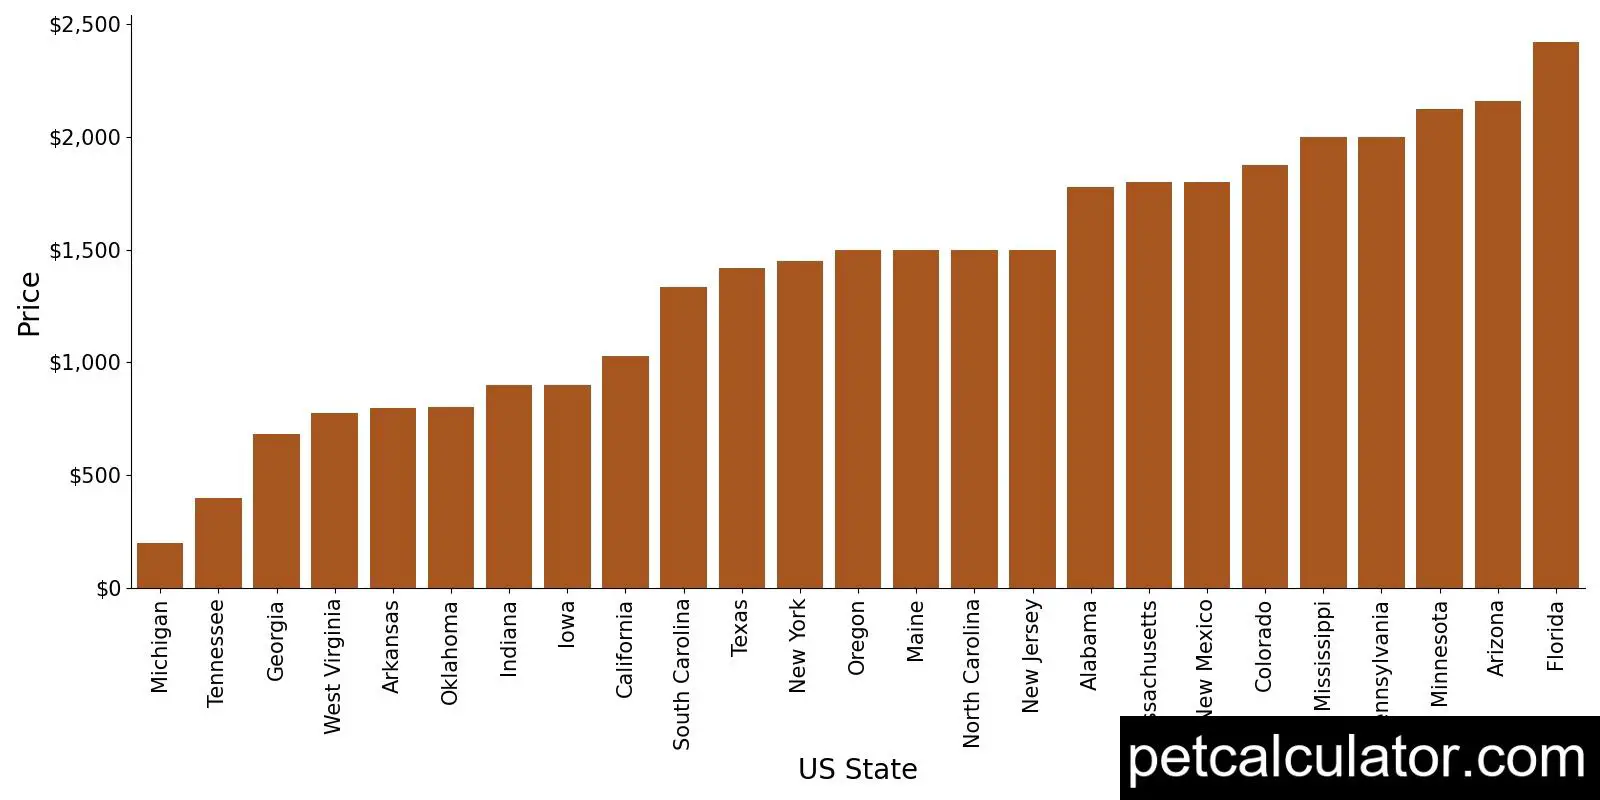 Price of Dutch Shepherd by US State 